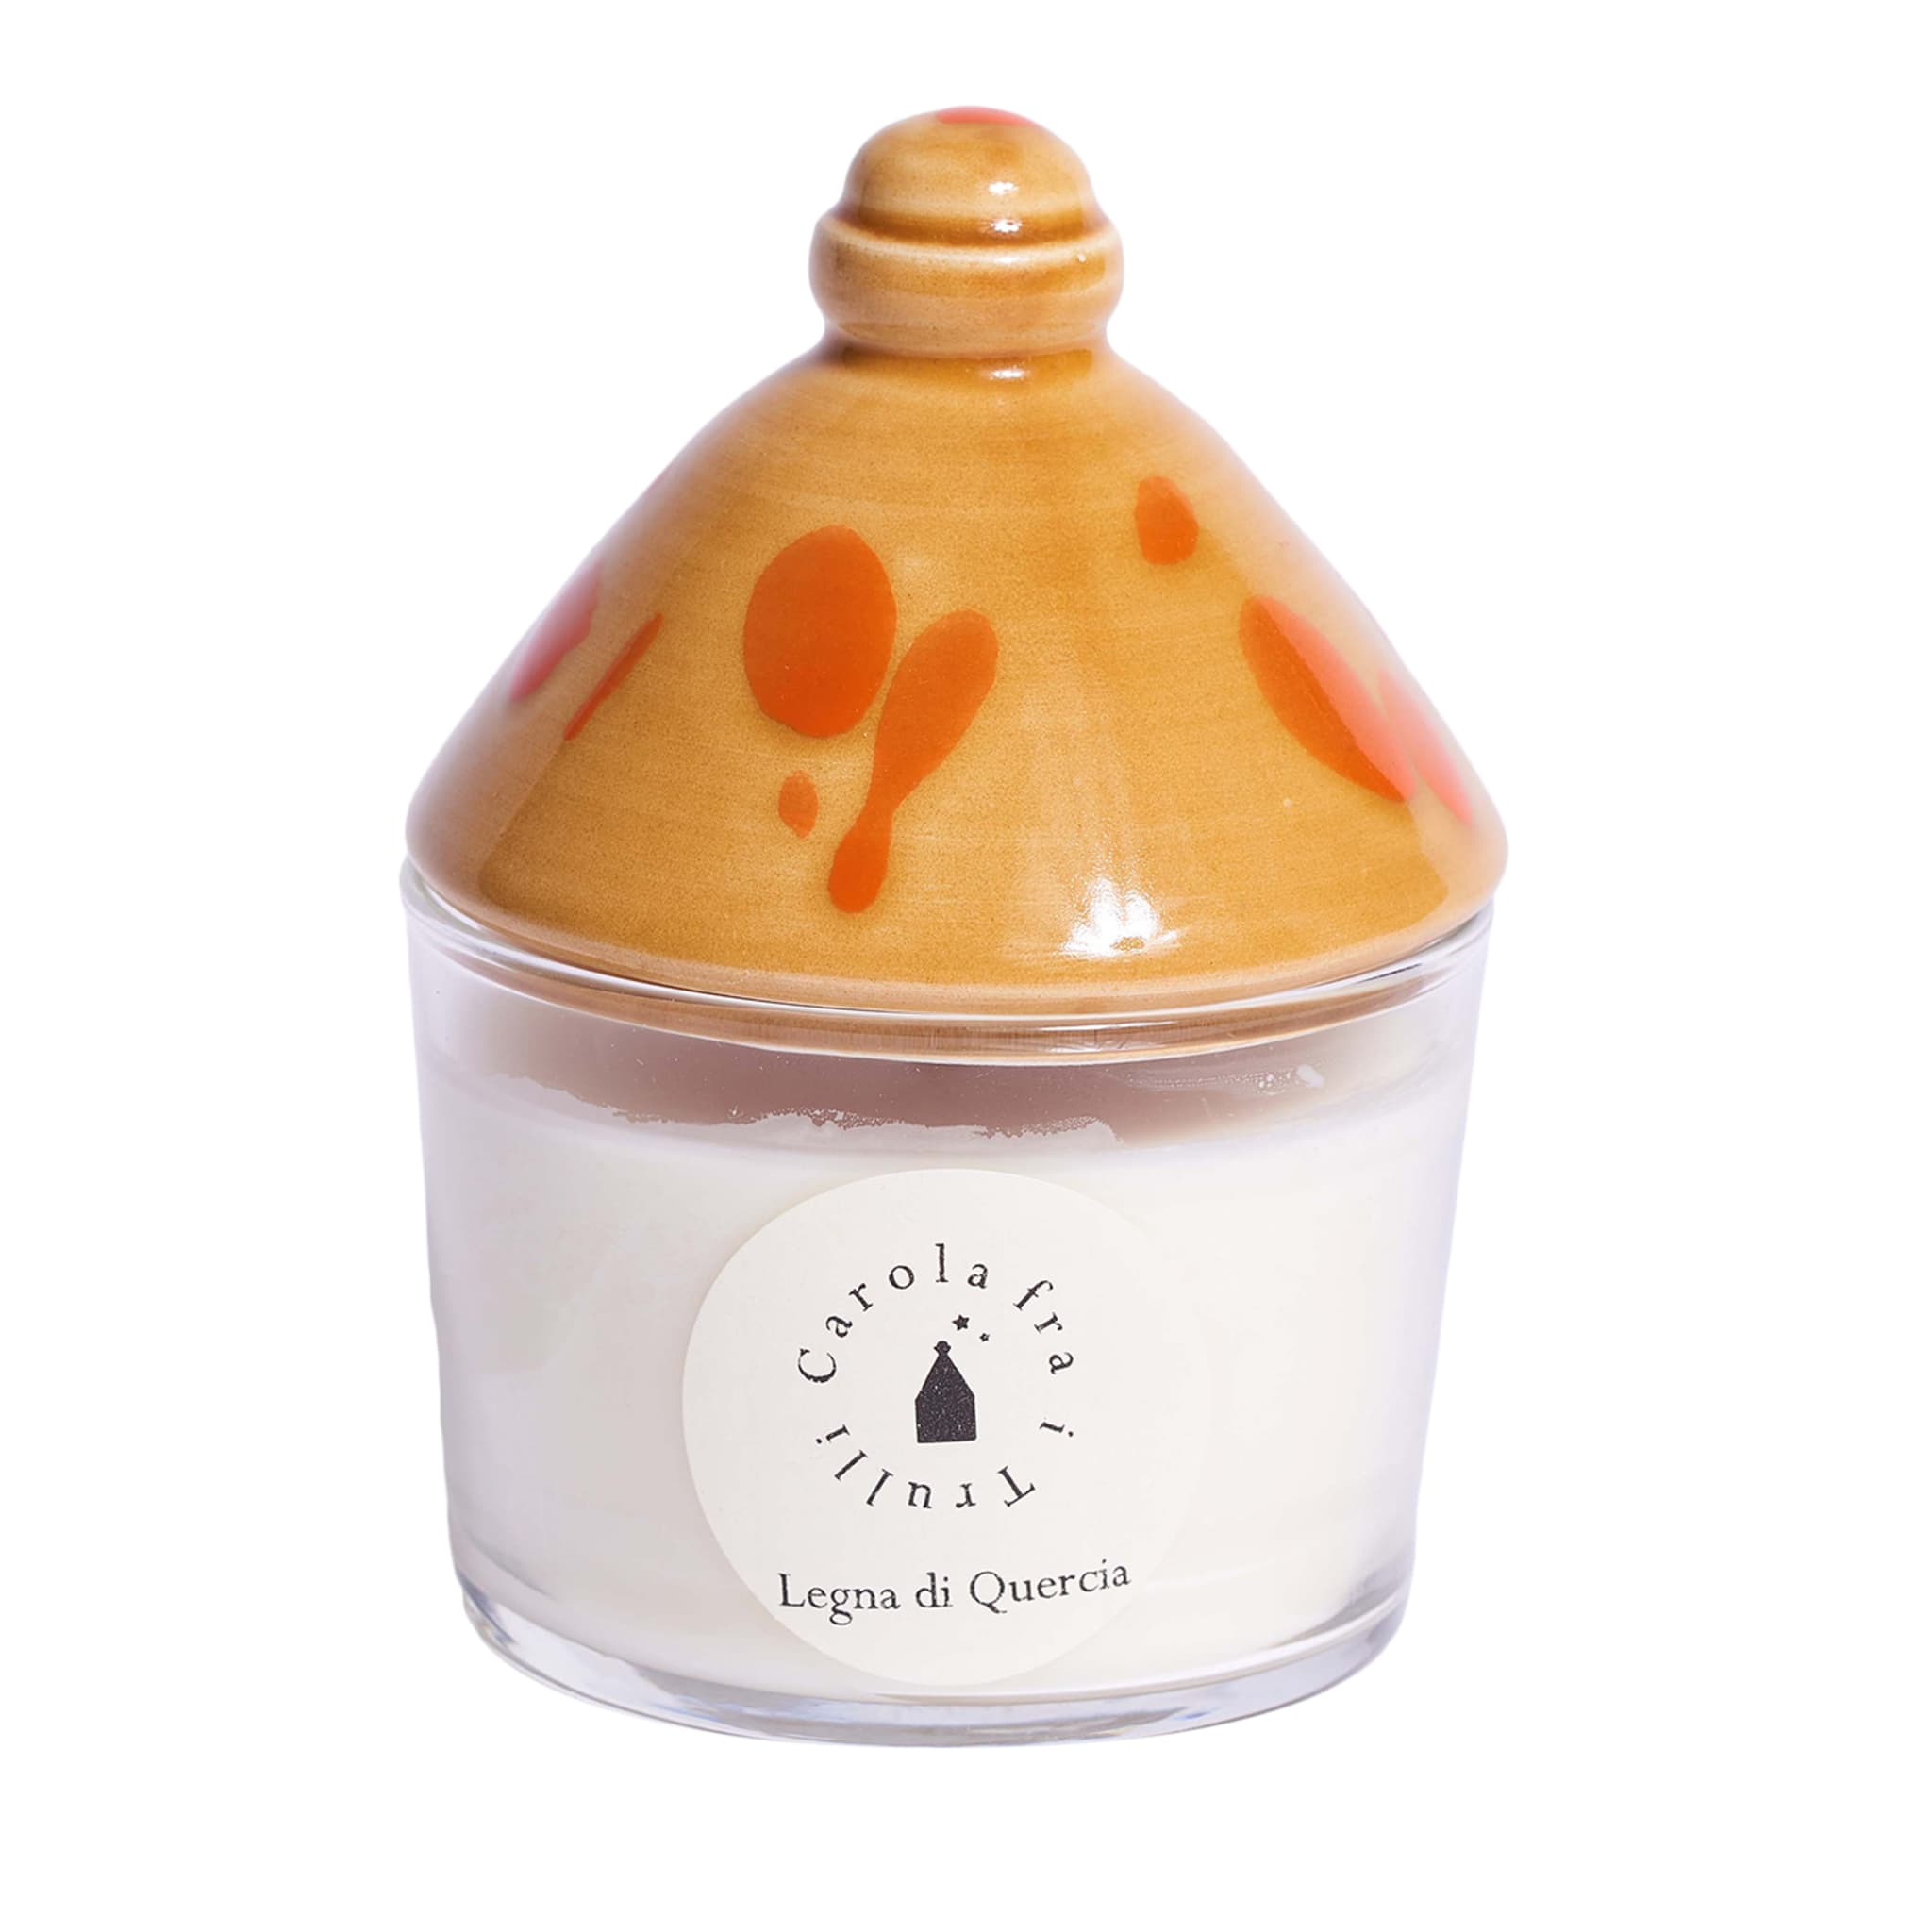 Caramel & Orange Scented Candel with Ceramic Lid - Main view